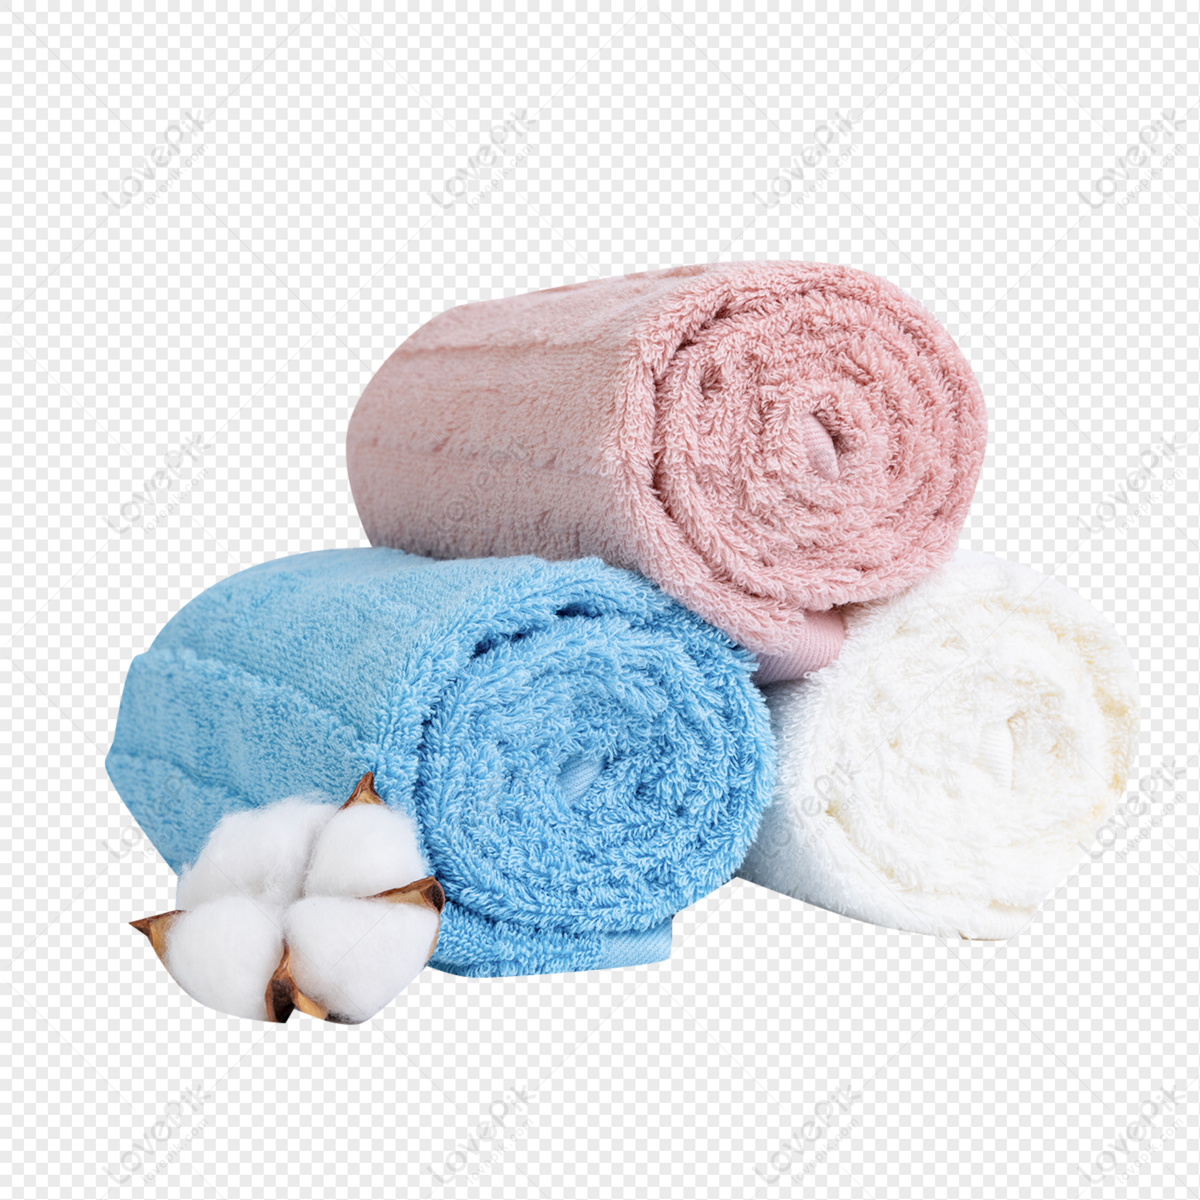 https://img.lovepik.com/free-png/20220126/lovepik-household-towels-png-image_401779896_wh1200.png